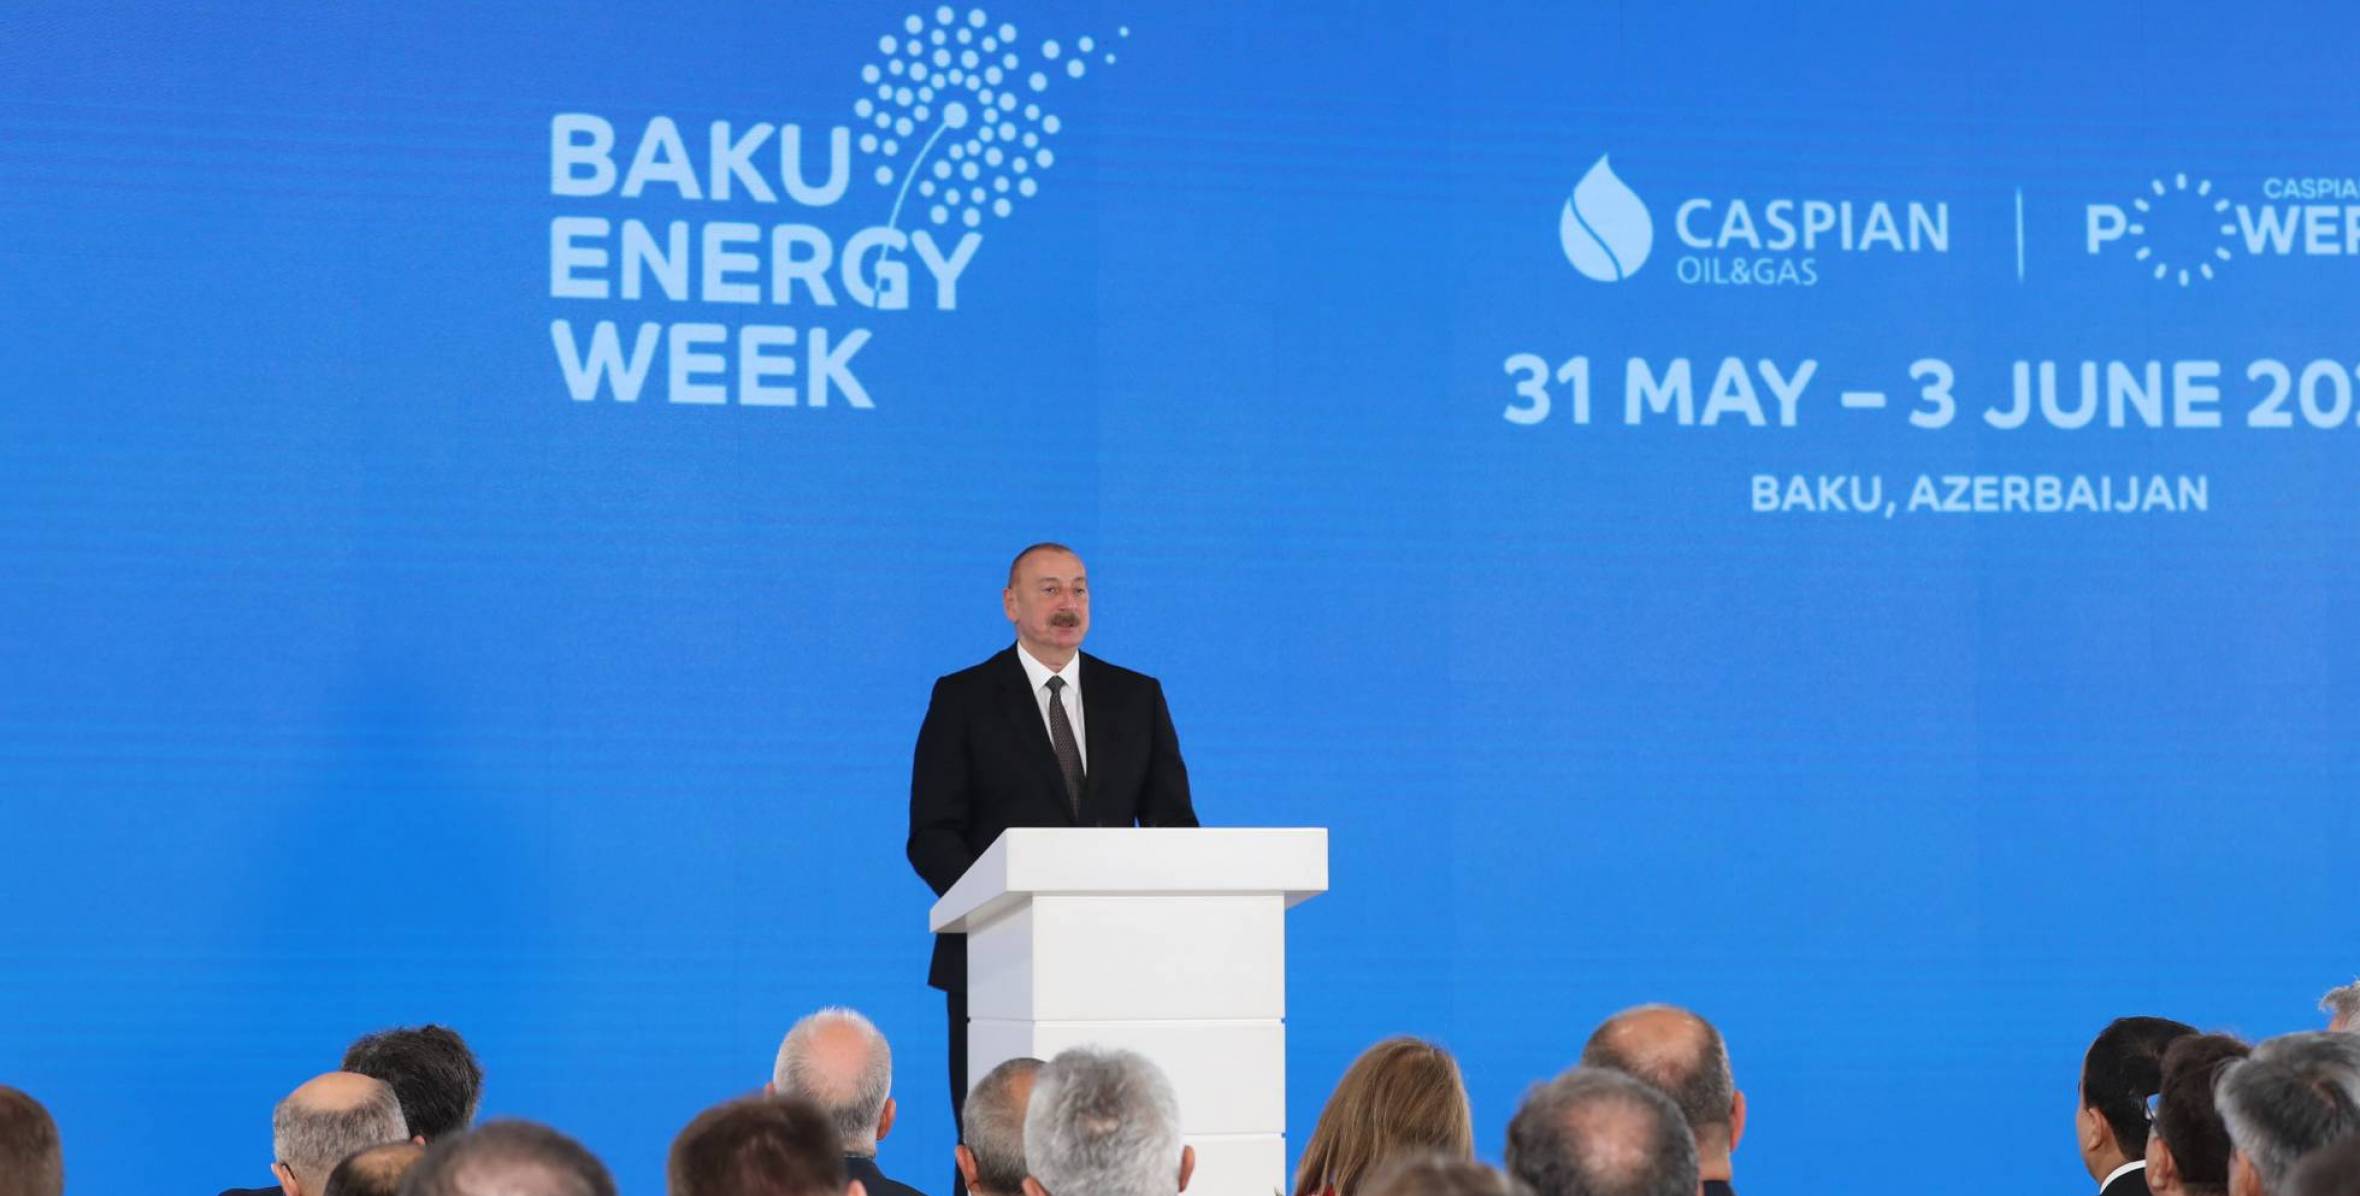 Speech by Ilham Aliyev at the official opening ceremony of 28th International Caspian Oil & Gas Exhibition within the framework of the Baku Energy Week